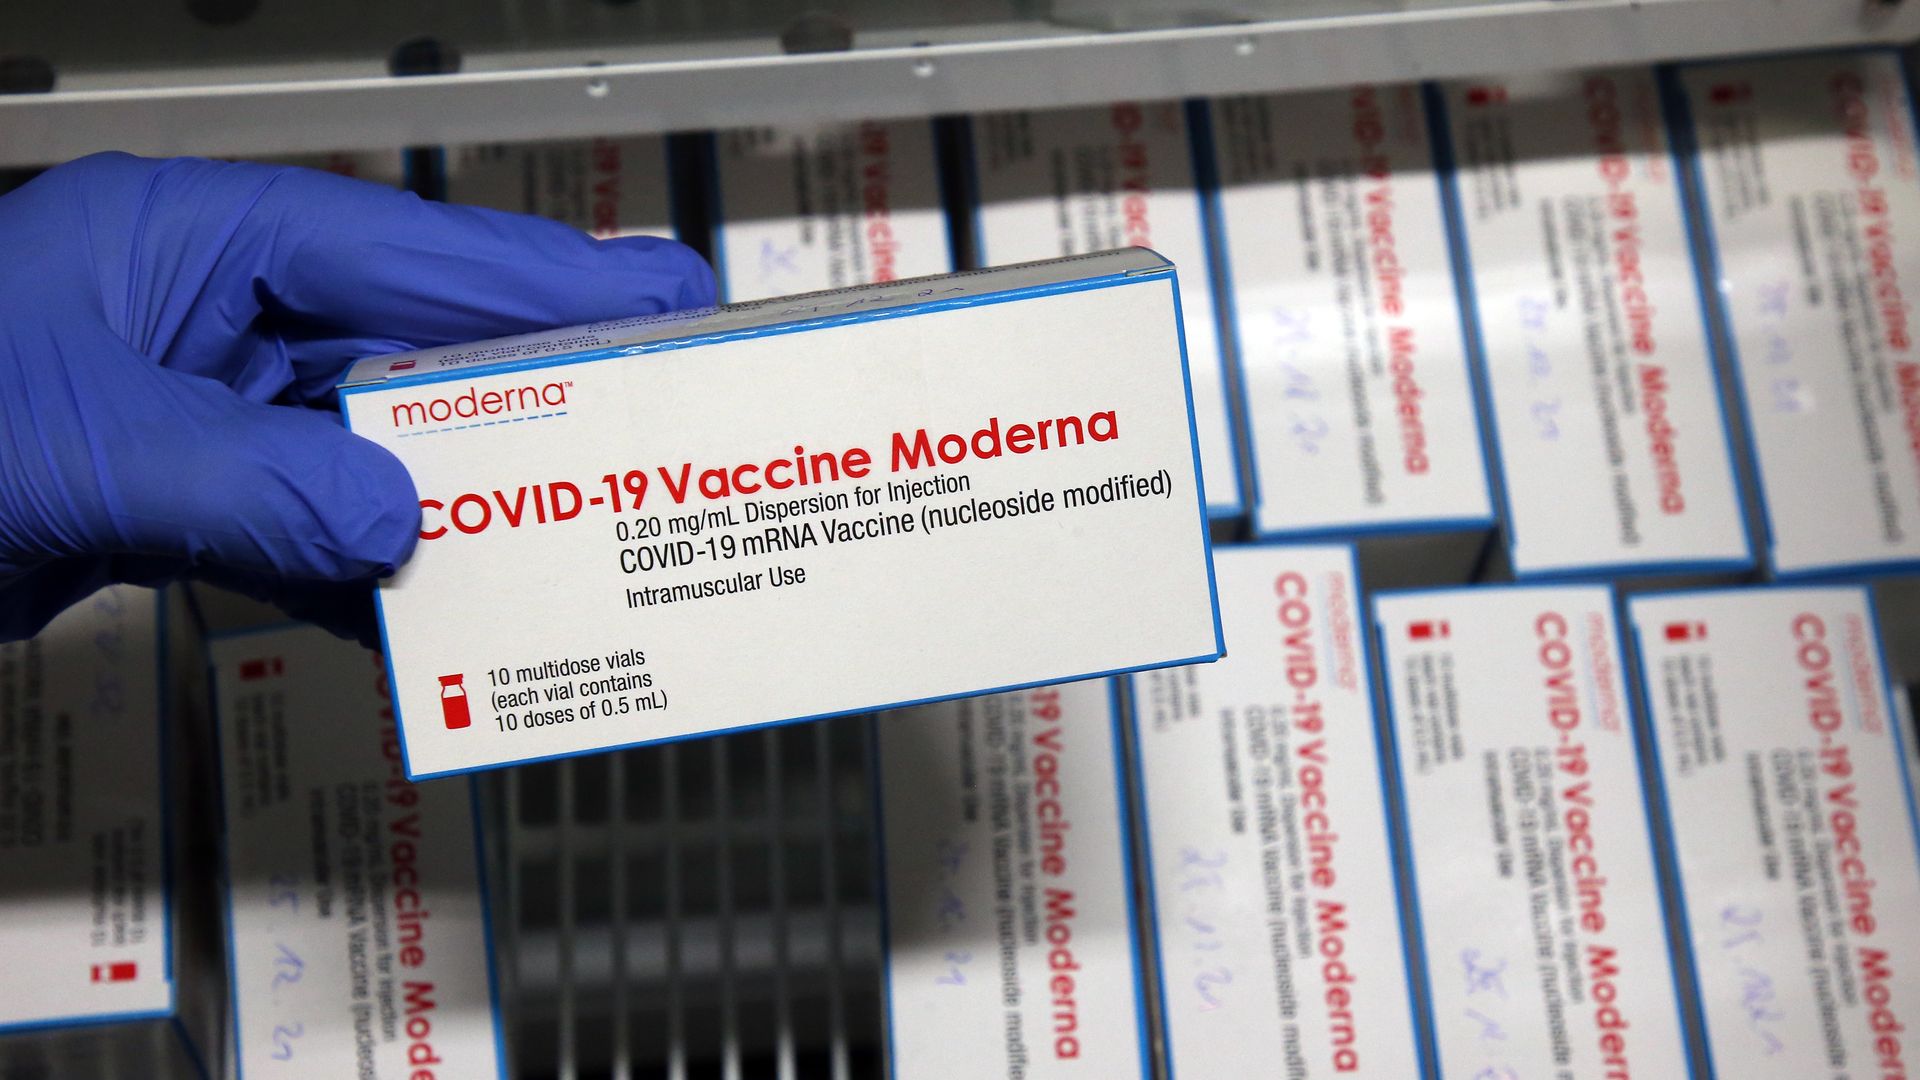 A hand holds a box of Moderna's COVID-19 vaccine, with other boxes in the background.